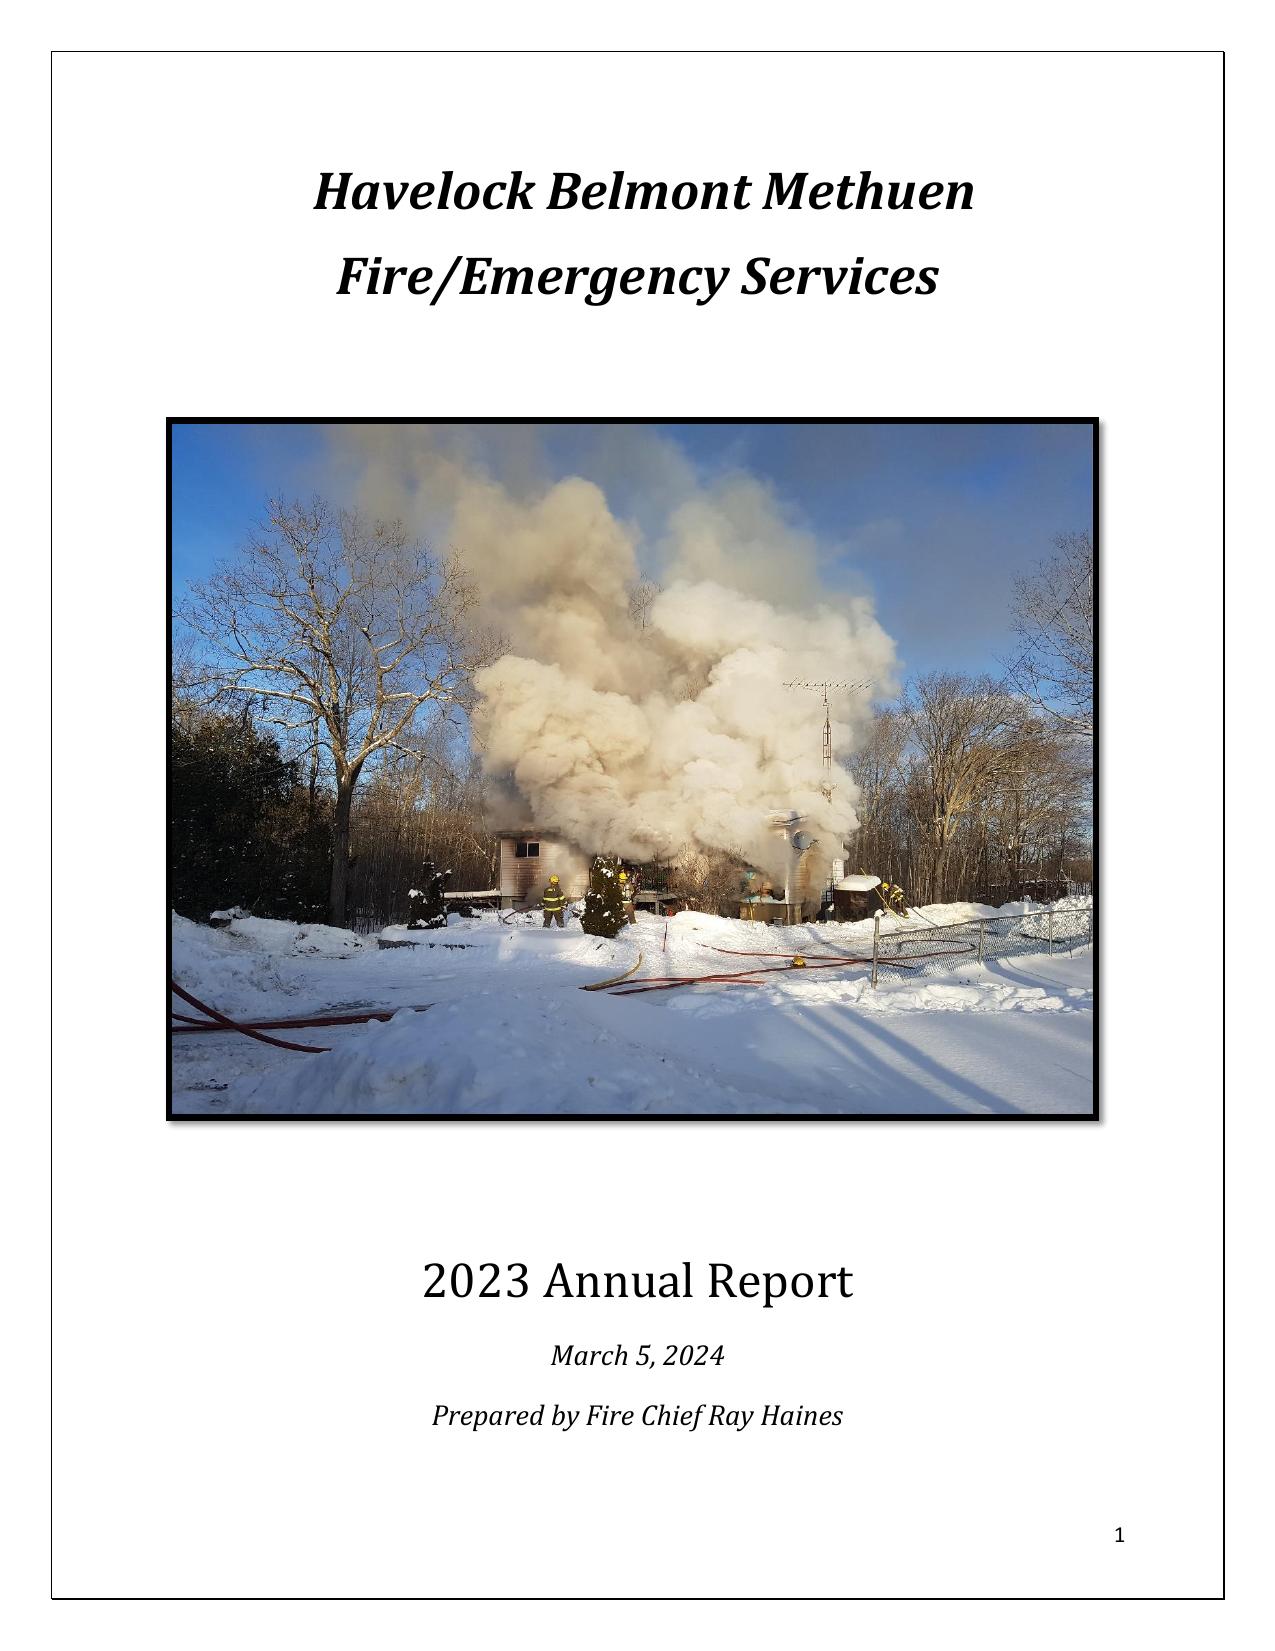 HBMTWP Annual Report